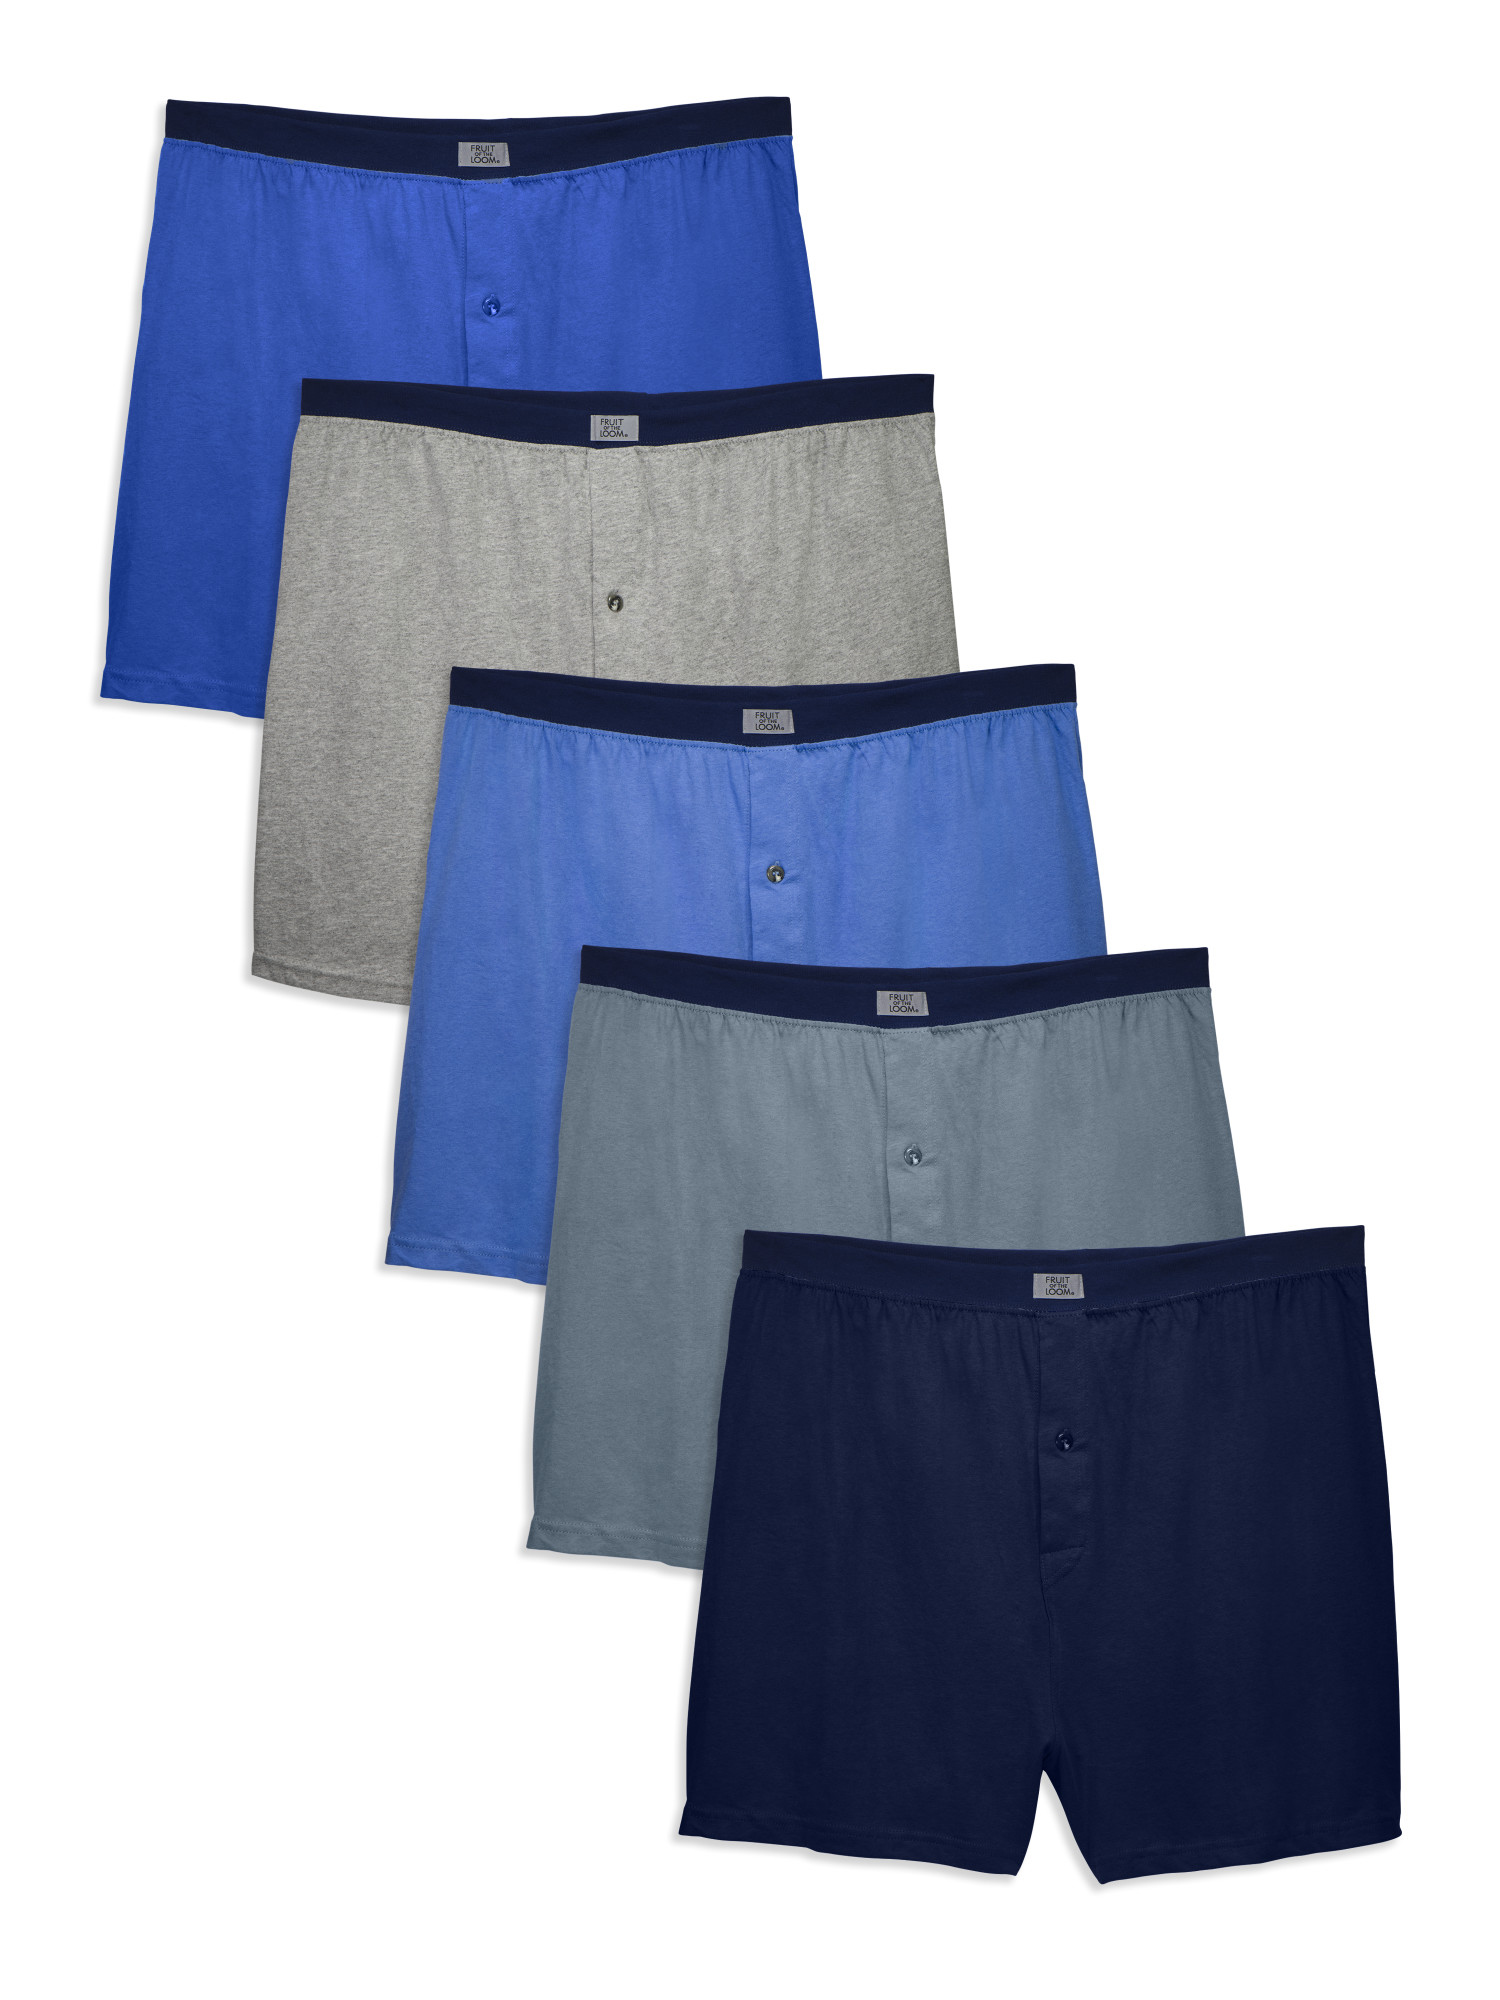 Fruit of the Loom Solid Knit Boxers 3-Pack Colors and patterns may vary